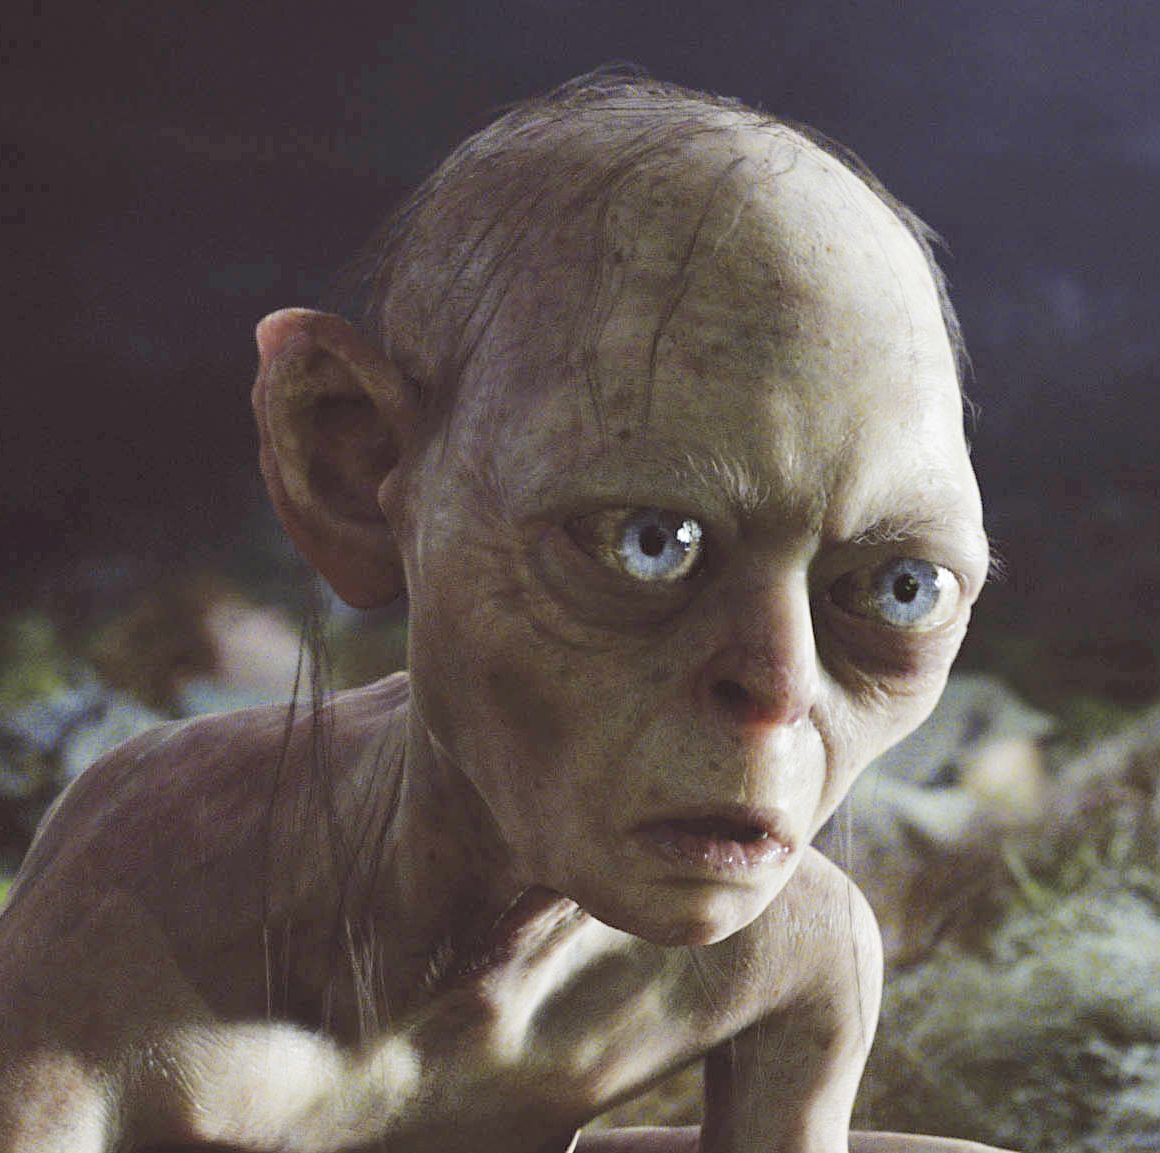 Lord of the Rings star Andy Serkis recalls being mocked over Gollum role